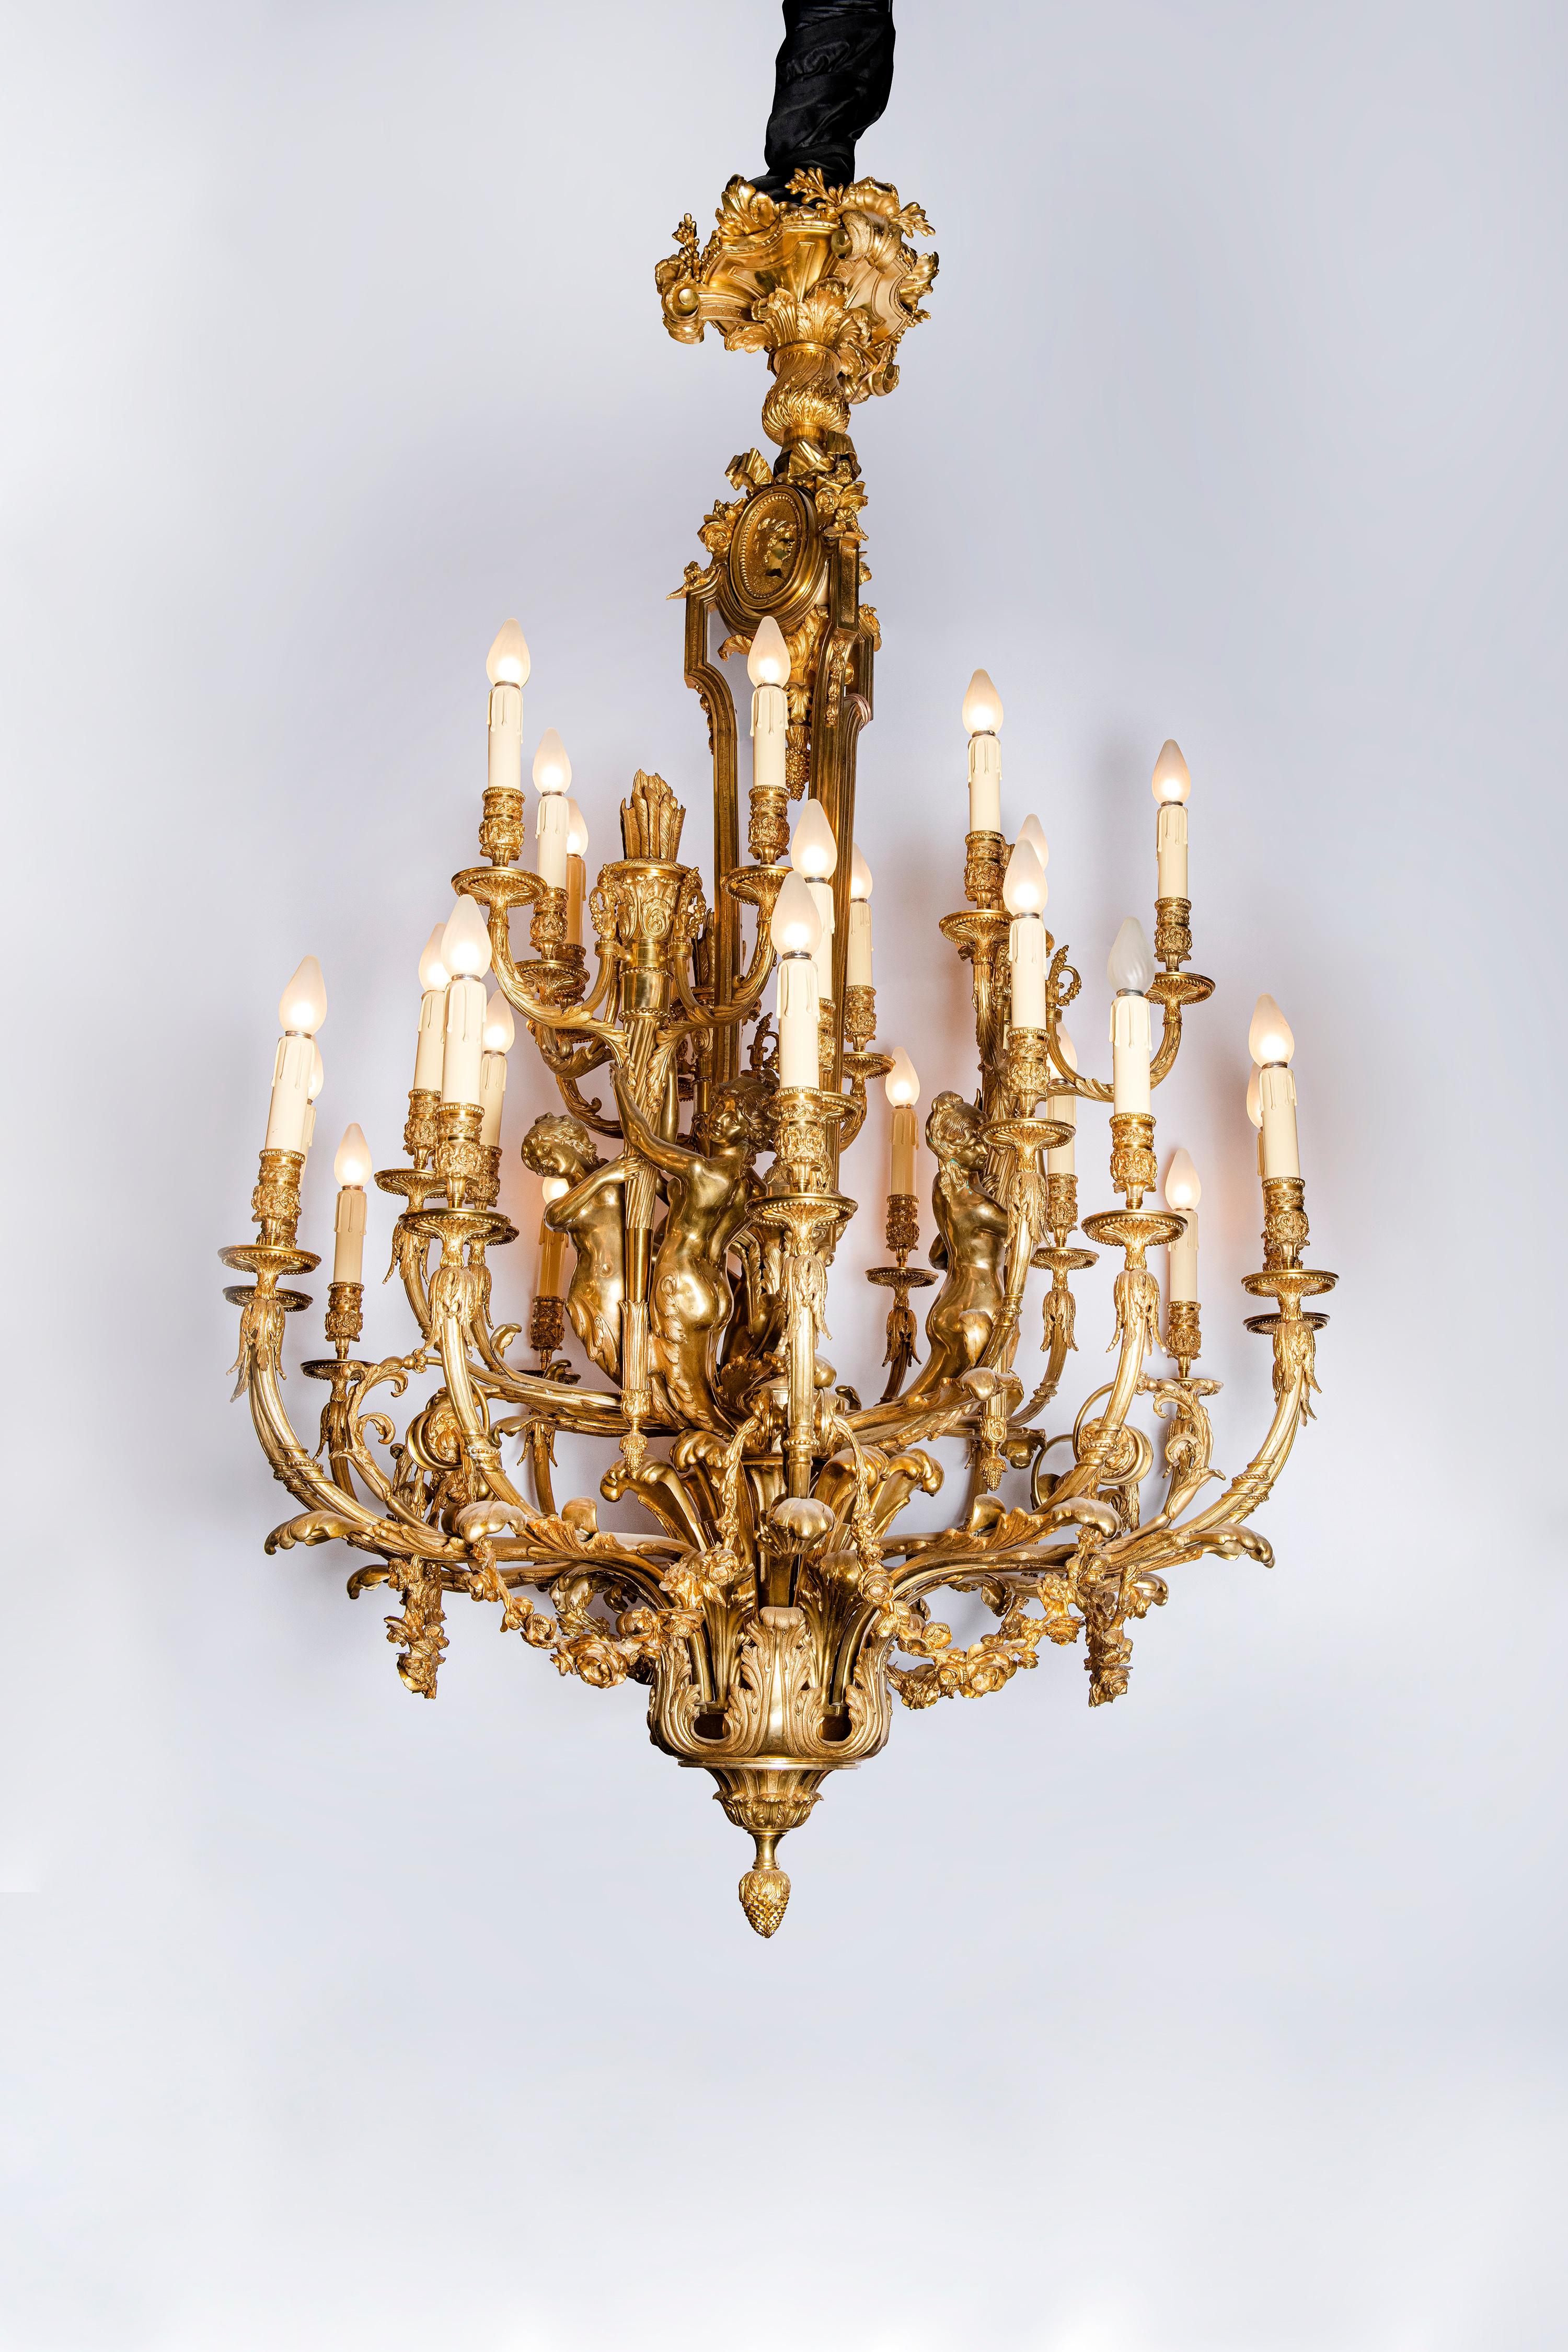 Pair of gilt bronze chandeliers with lost-wax process, France, circa 1890.
The price is for the pair but we also sell one individual item.